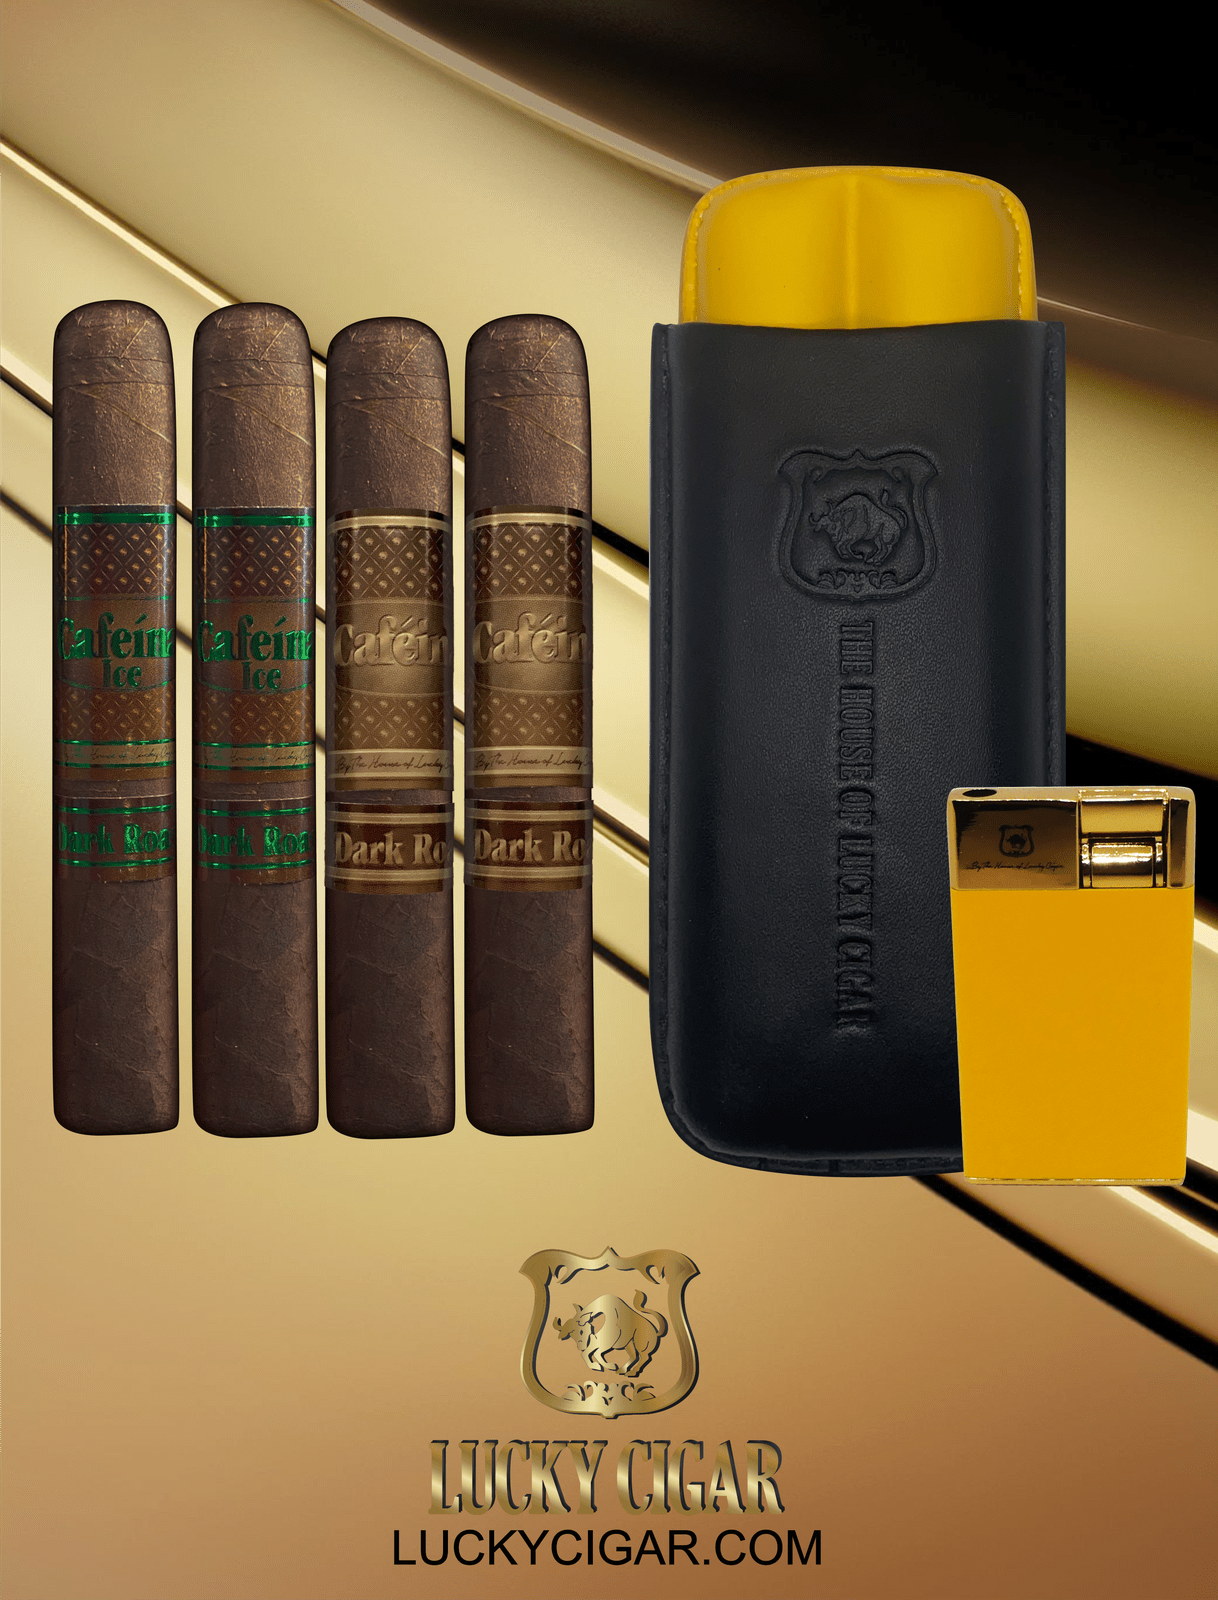 Infused Cigars: 2 Cafeina Cigars with Yellow Travel Humidor, Lighter